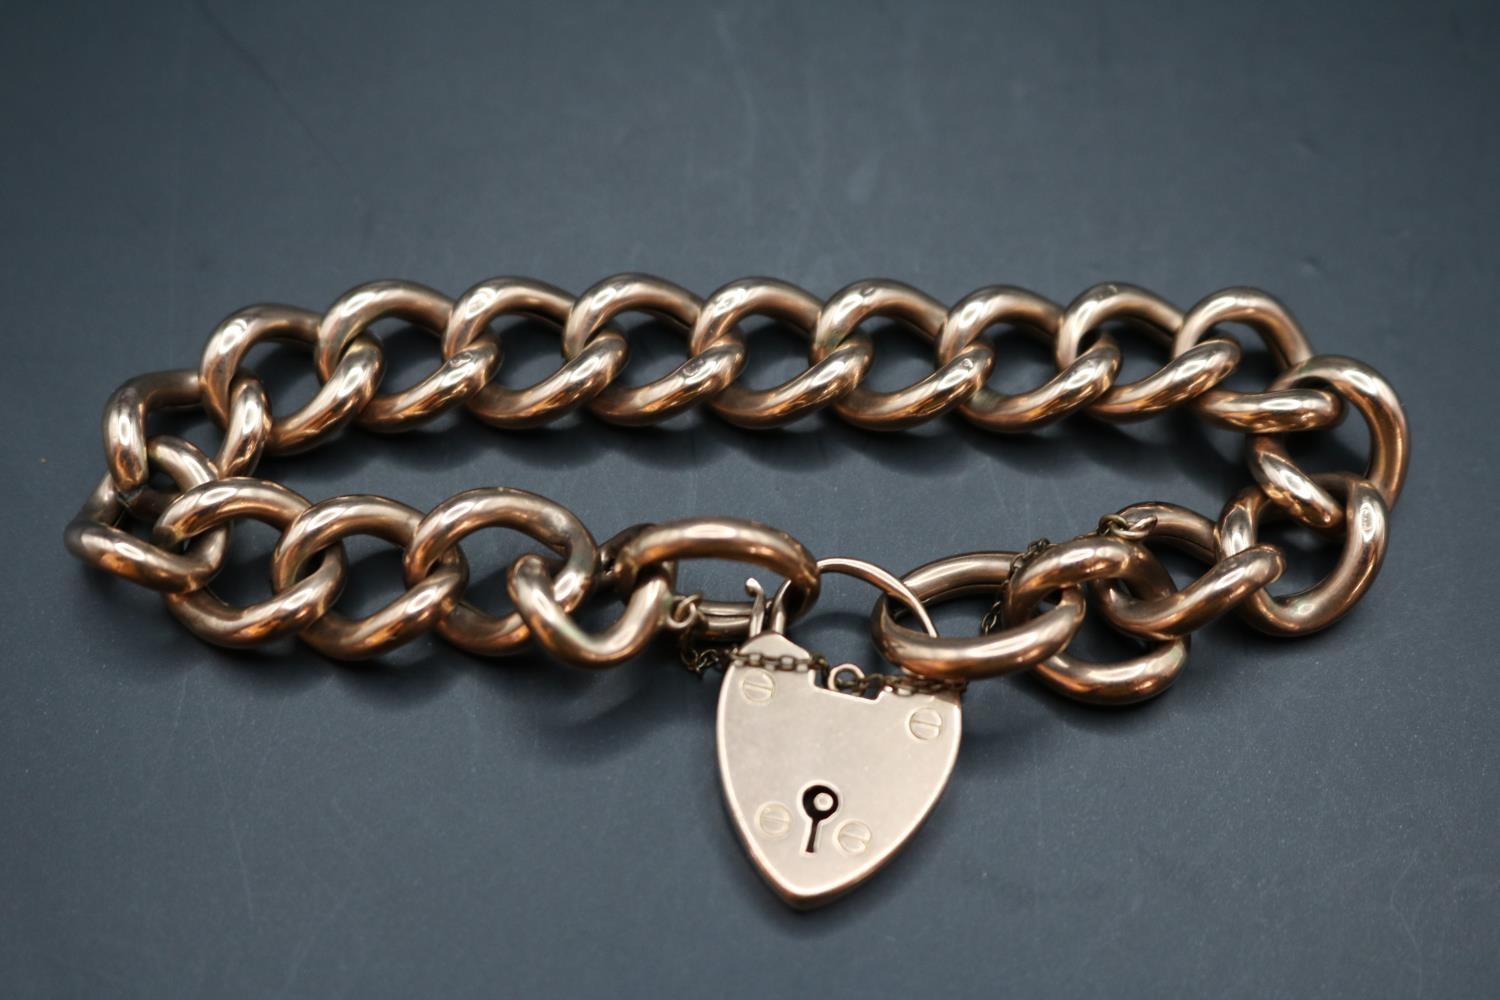 Edwardian 9ct Gold Chain hollow link Bracelet with Padlock and safety chain. 19cm in Length 21.3g - Image 2 of 2